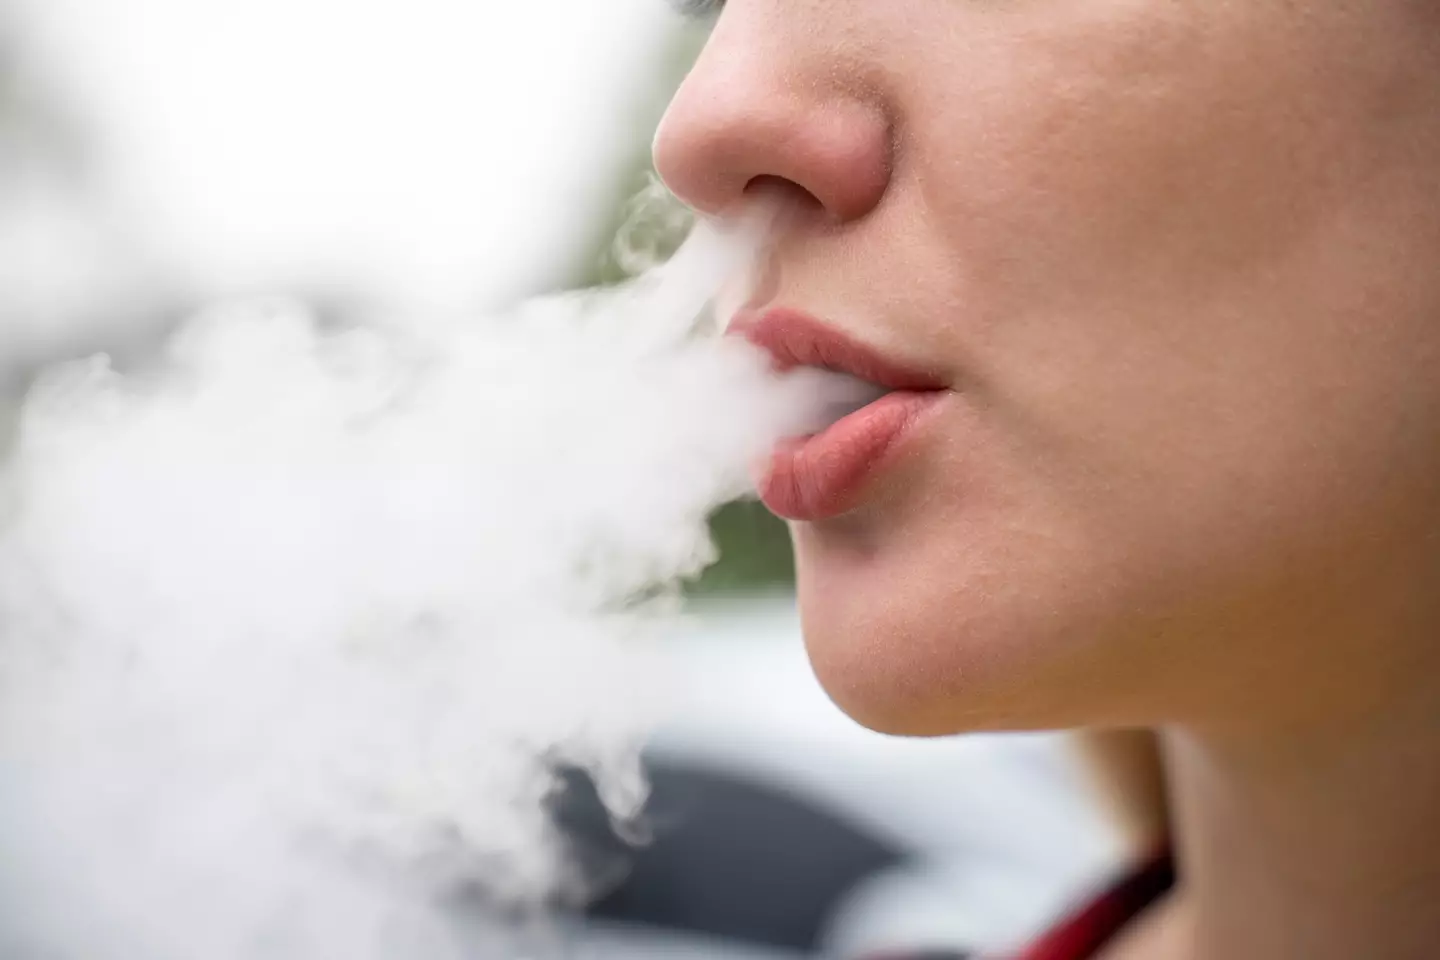 Vaper's Tongue can mask other underlying oral health issues.